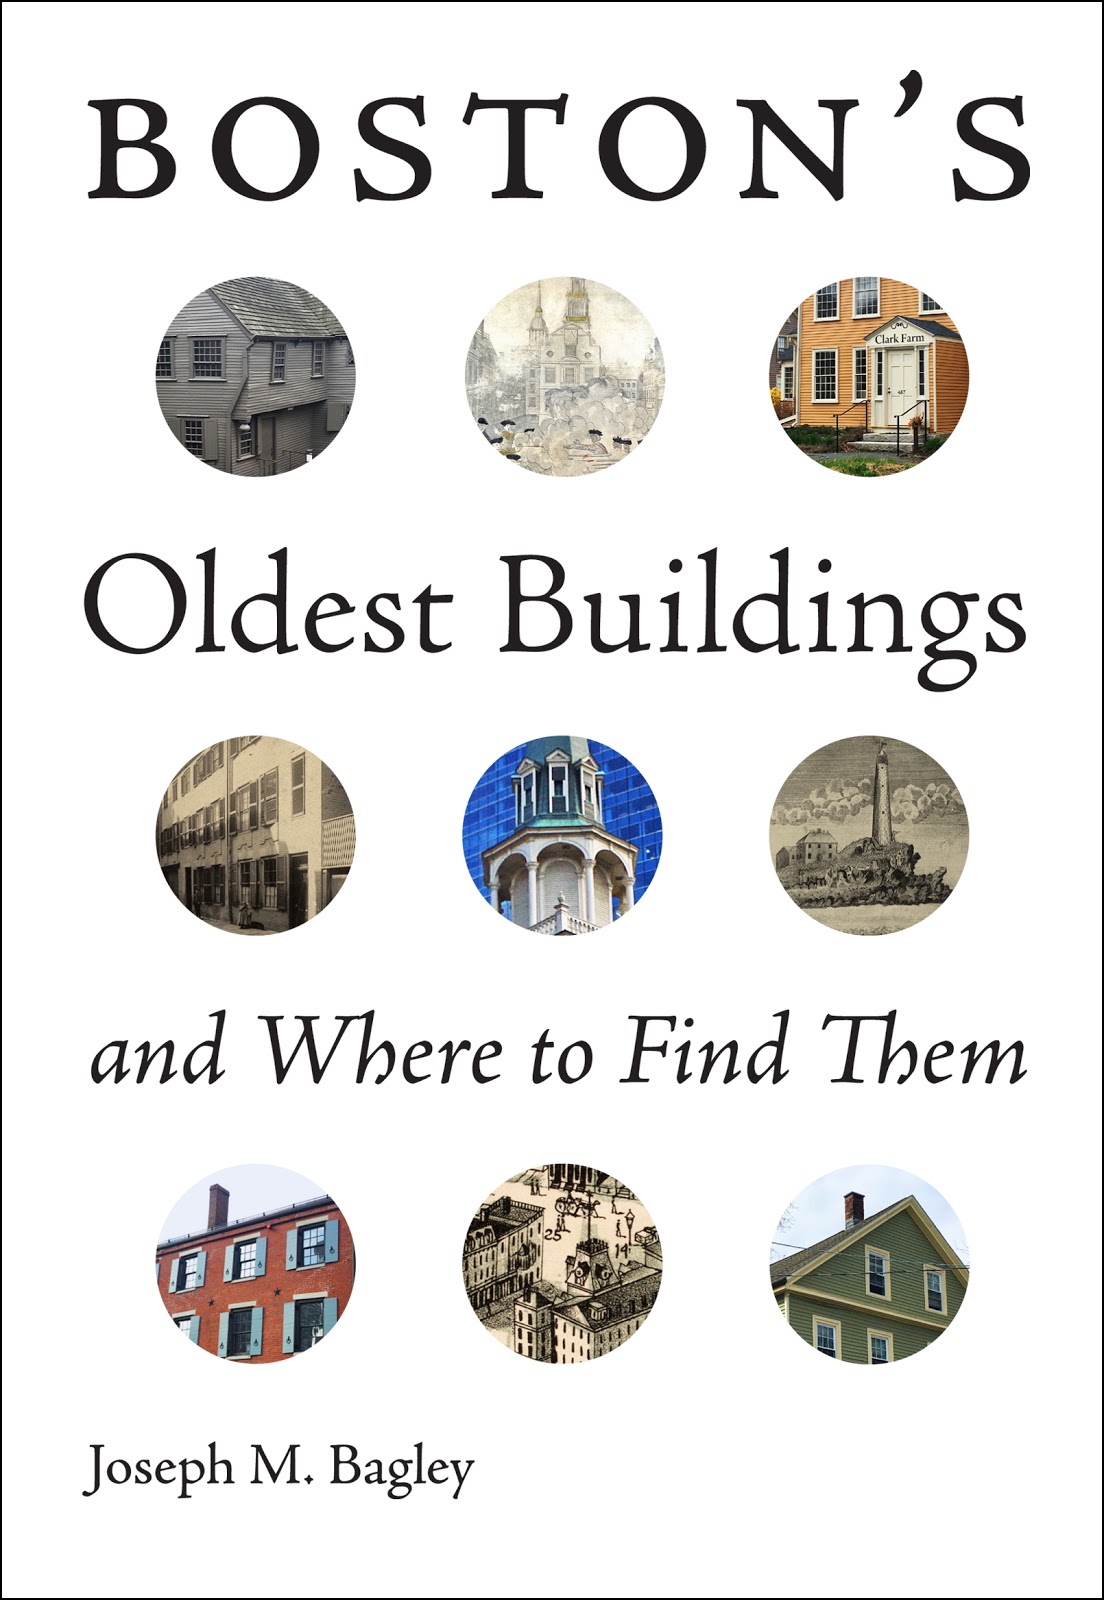 "Boston's Oldest Buildings and Where to Find Them" by Joe Bagley